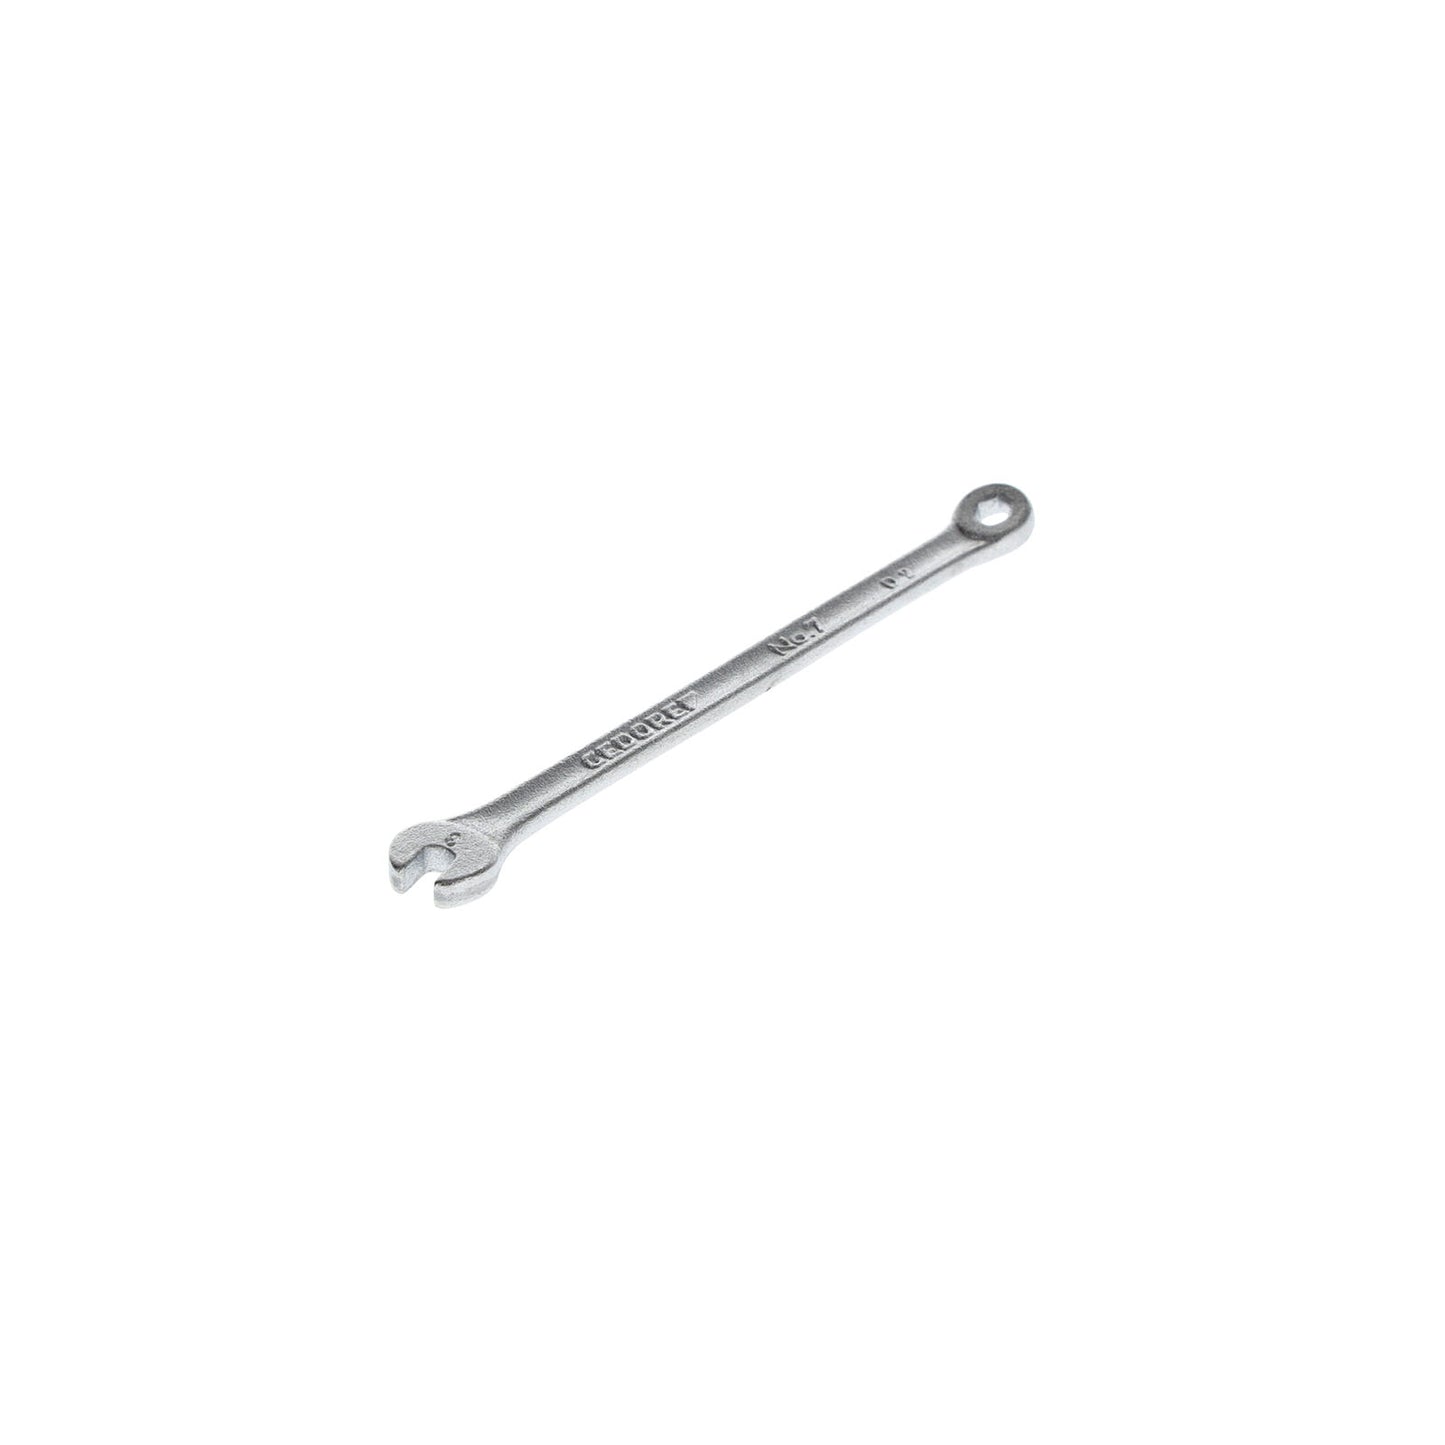 GEDORE 7 3 - Combination Wrench, 3 mm (6080680)